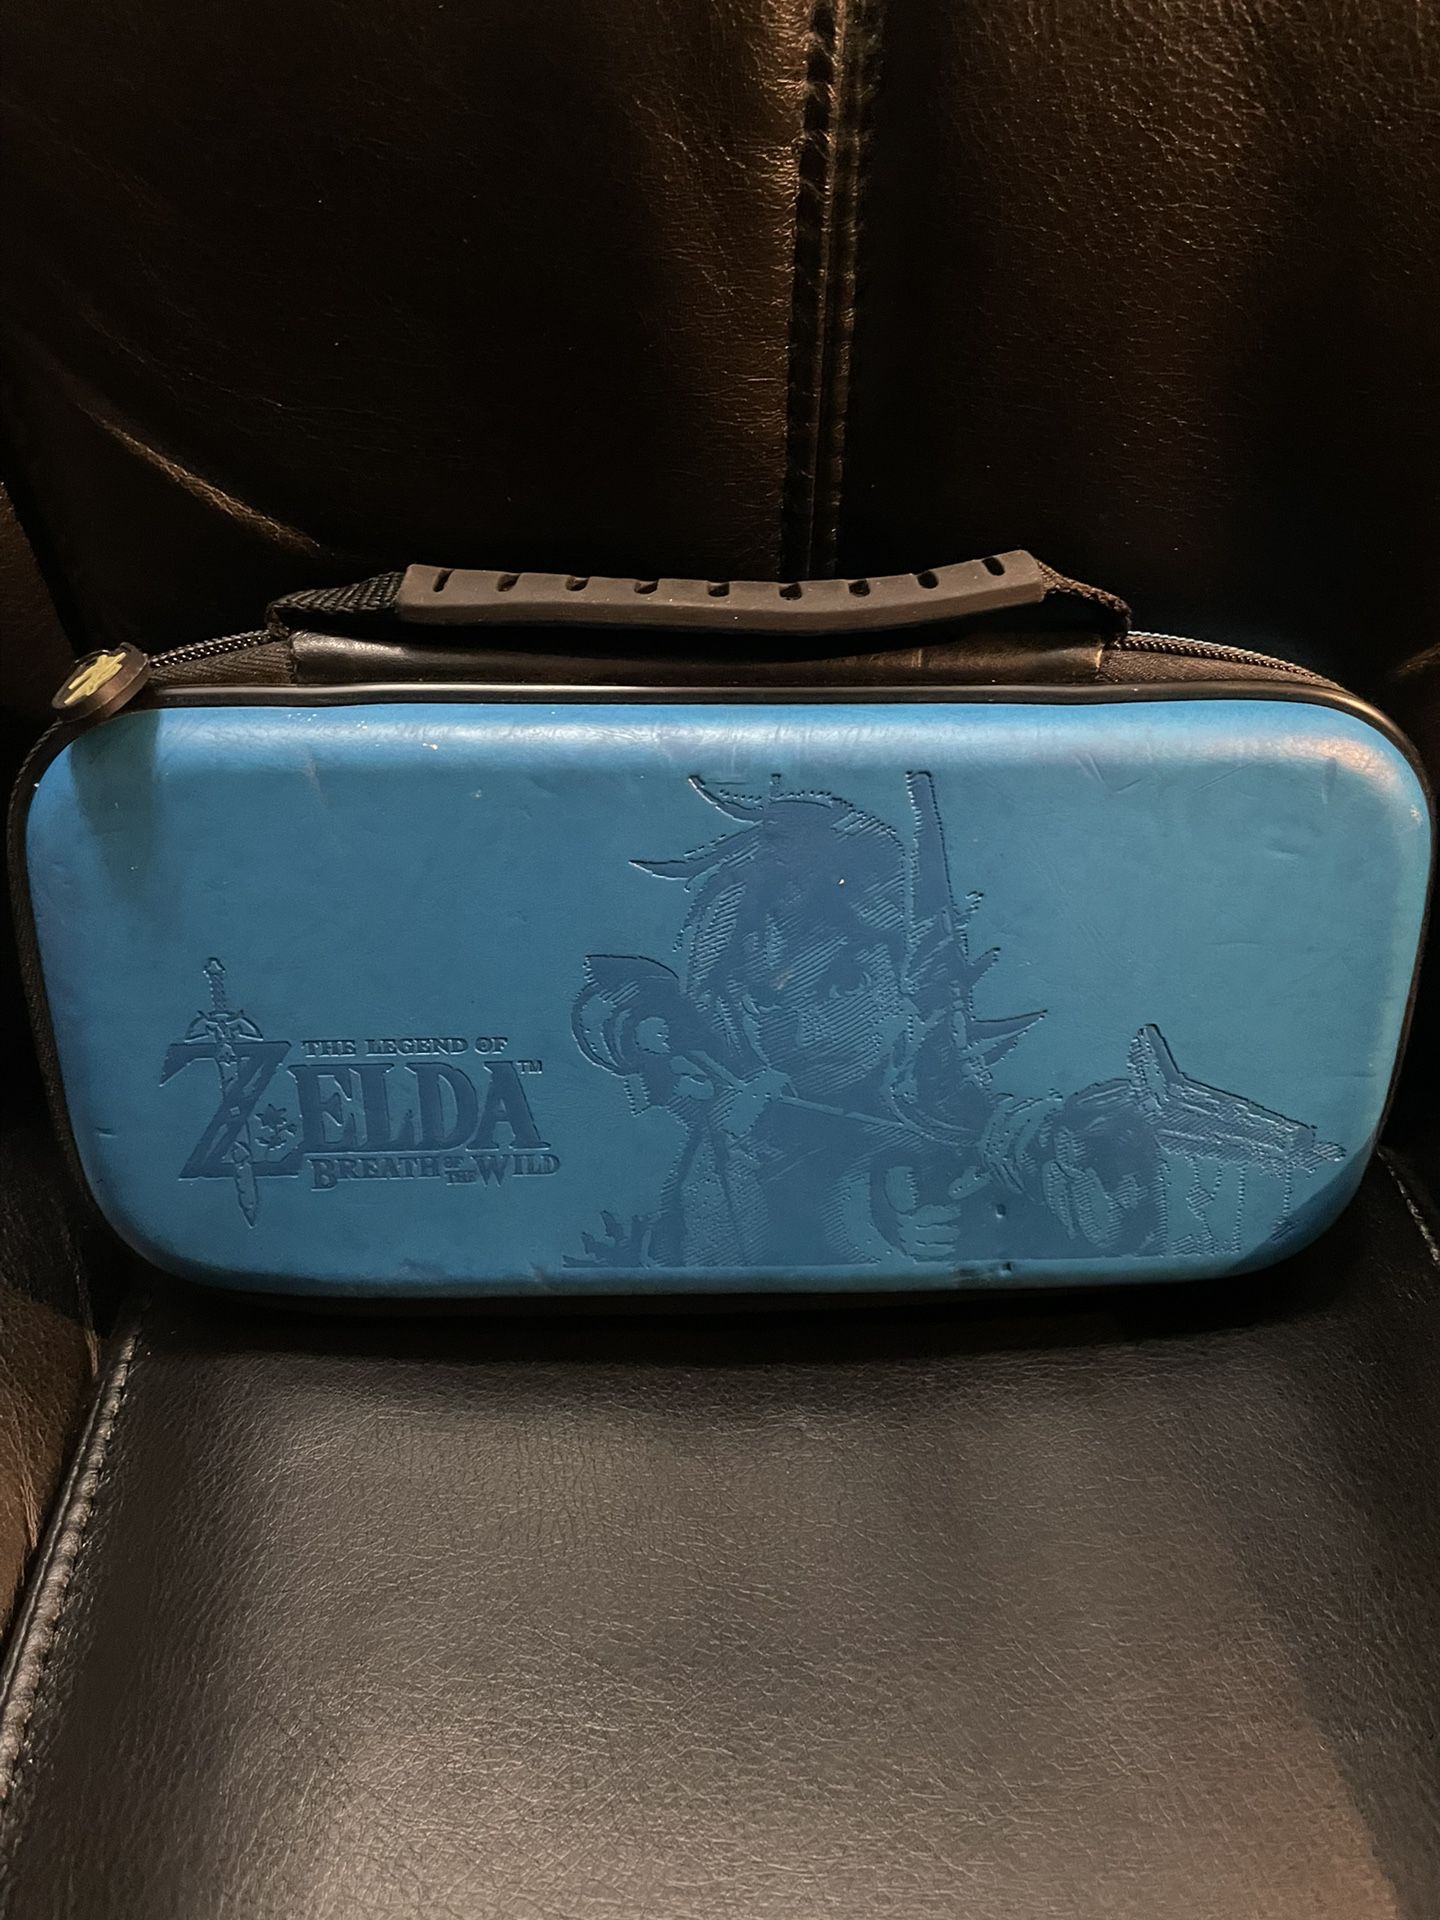 The Legend of Zelda Breath of the Wild Nintendo Switch Carrying Travel Case Blue